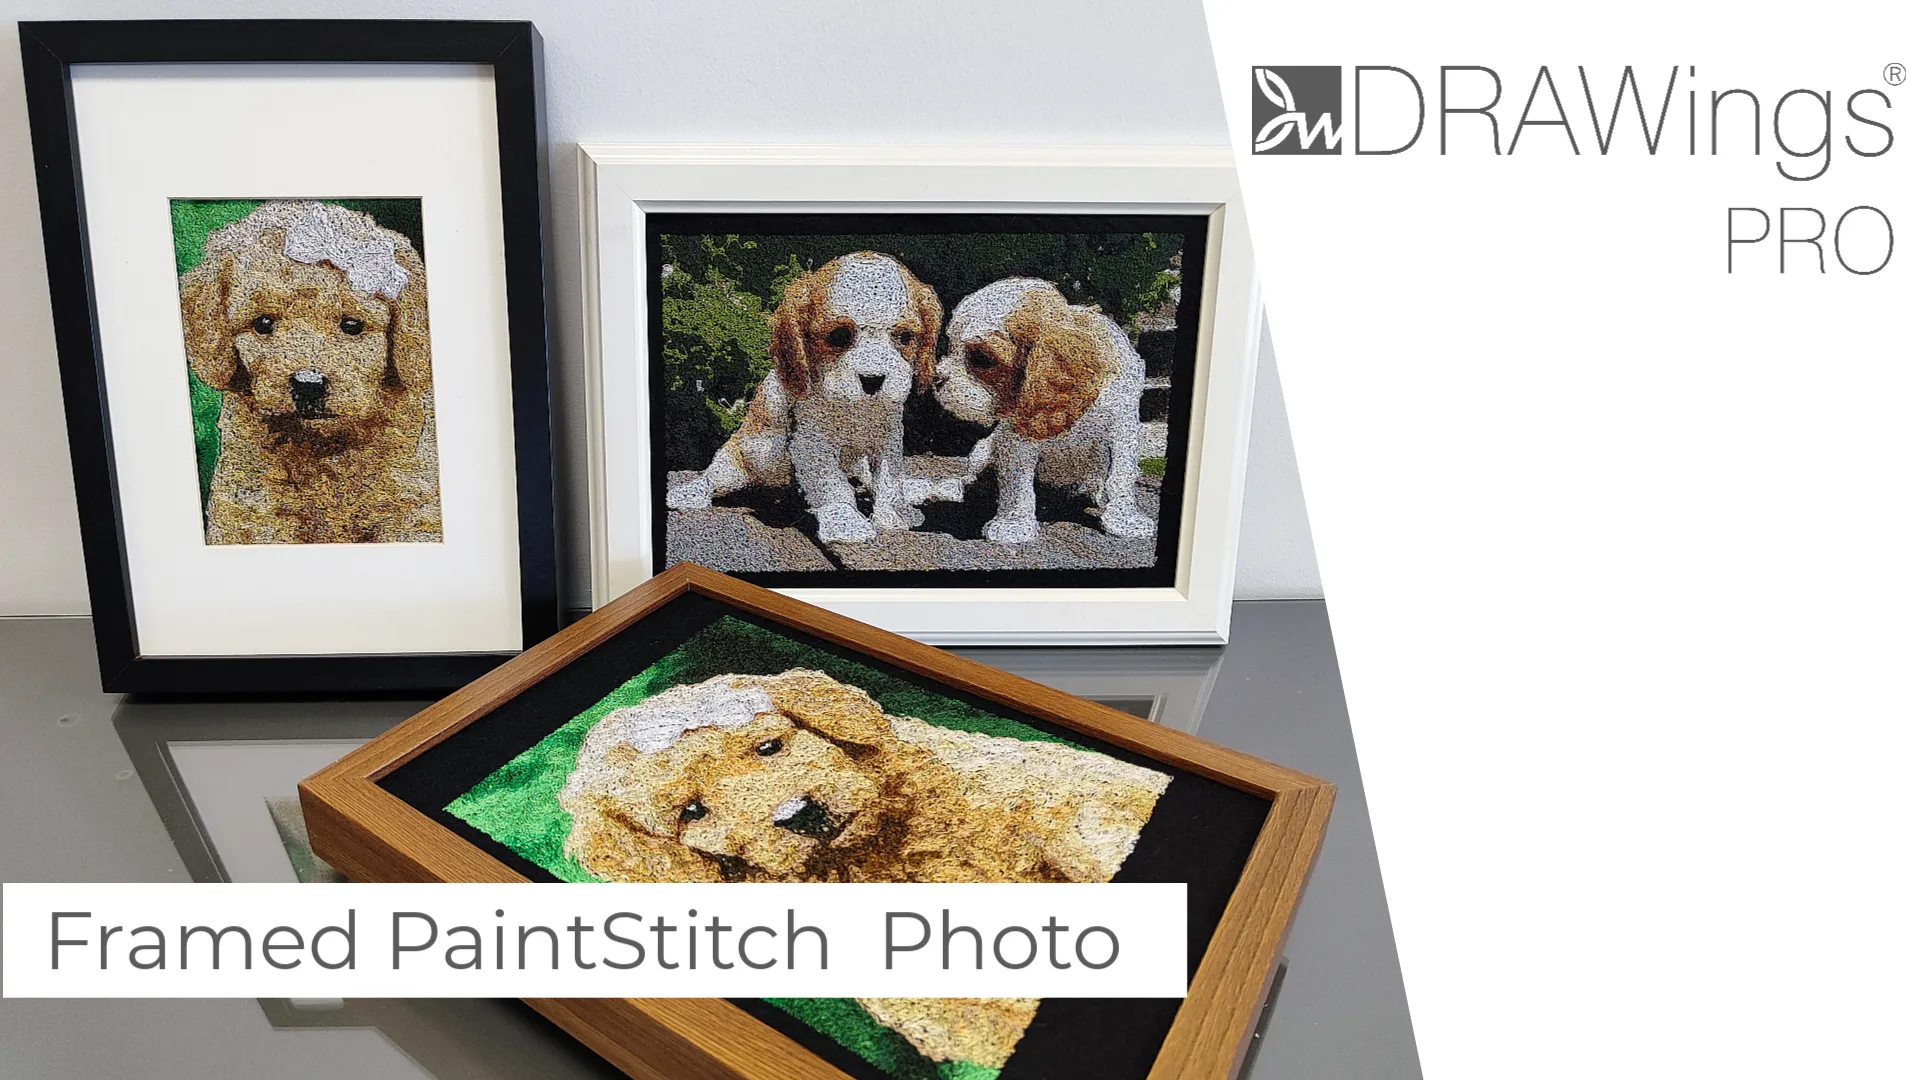 Creating-Photo-Realistic-Embroidery-with-PaintStitch